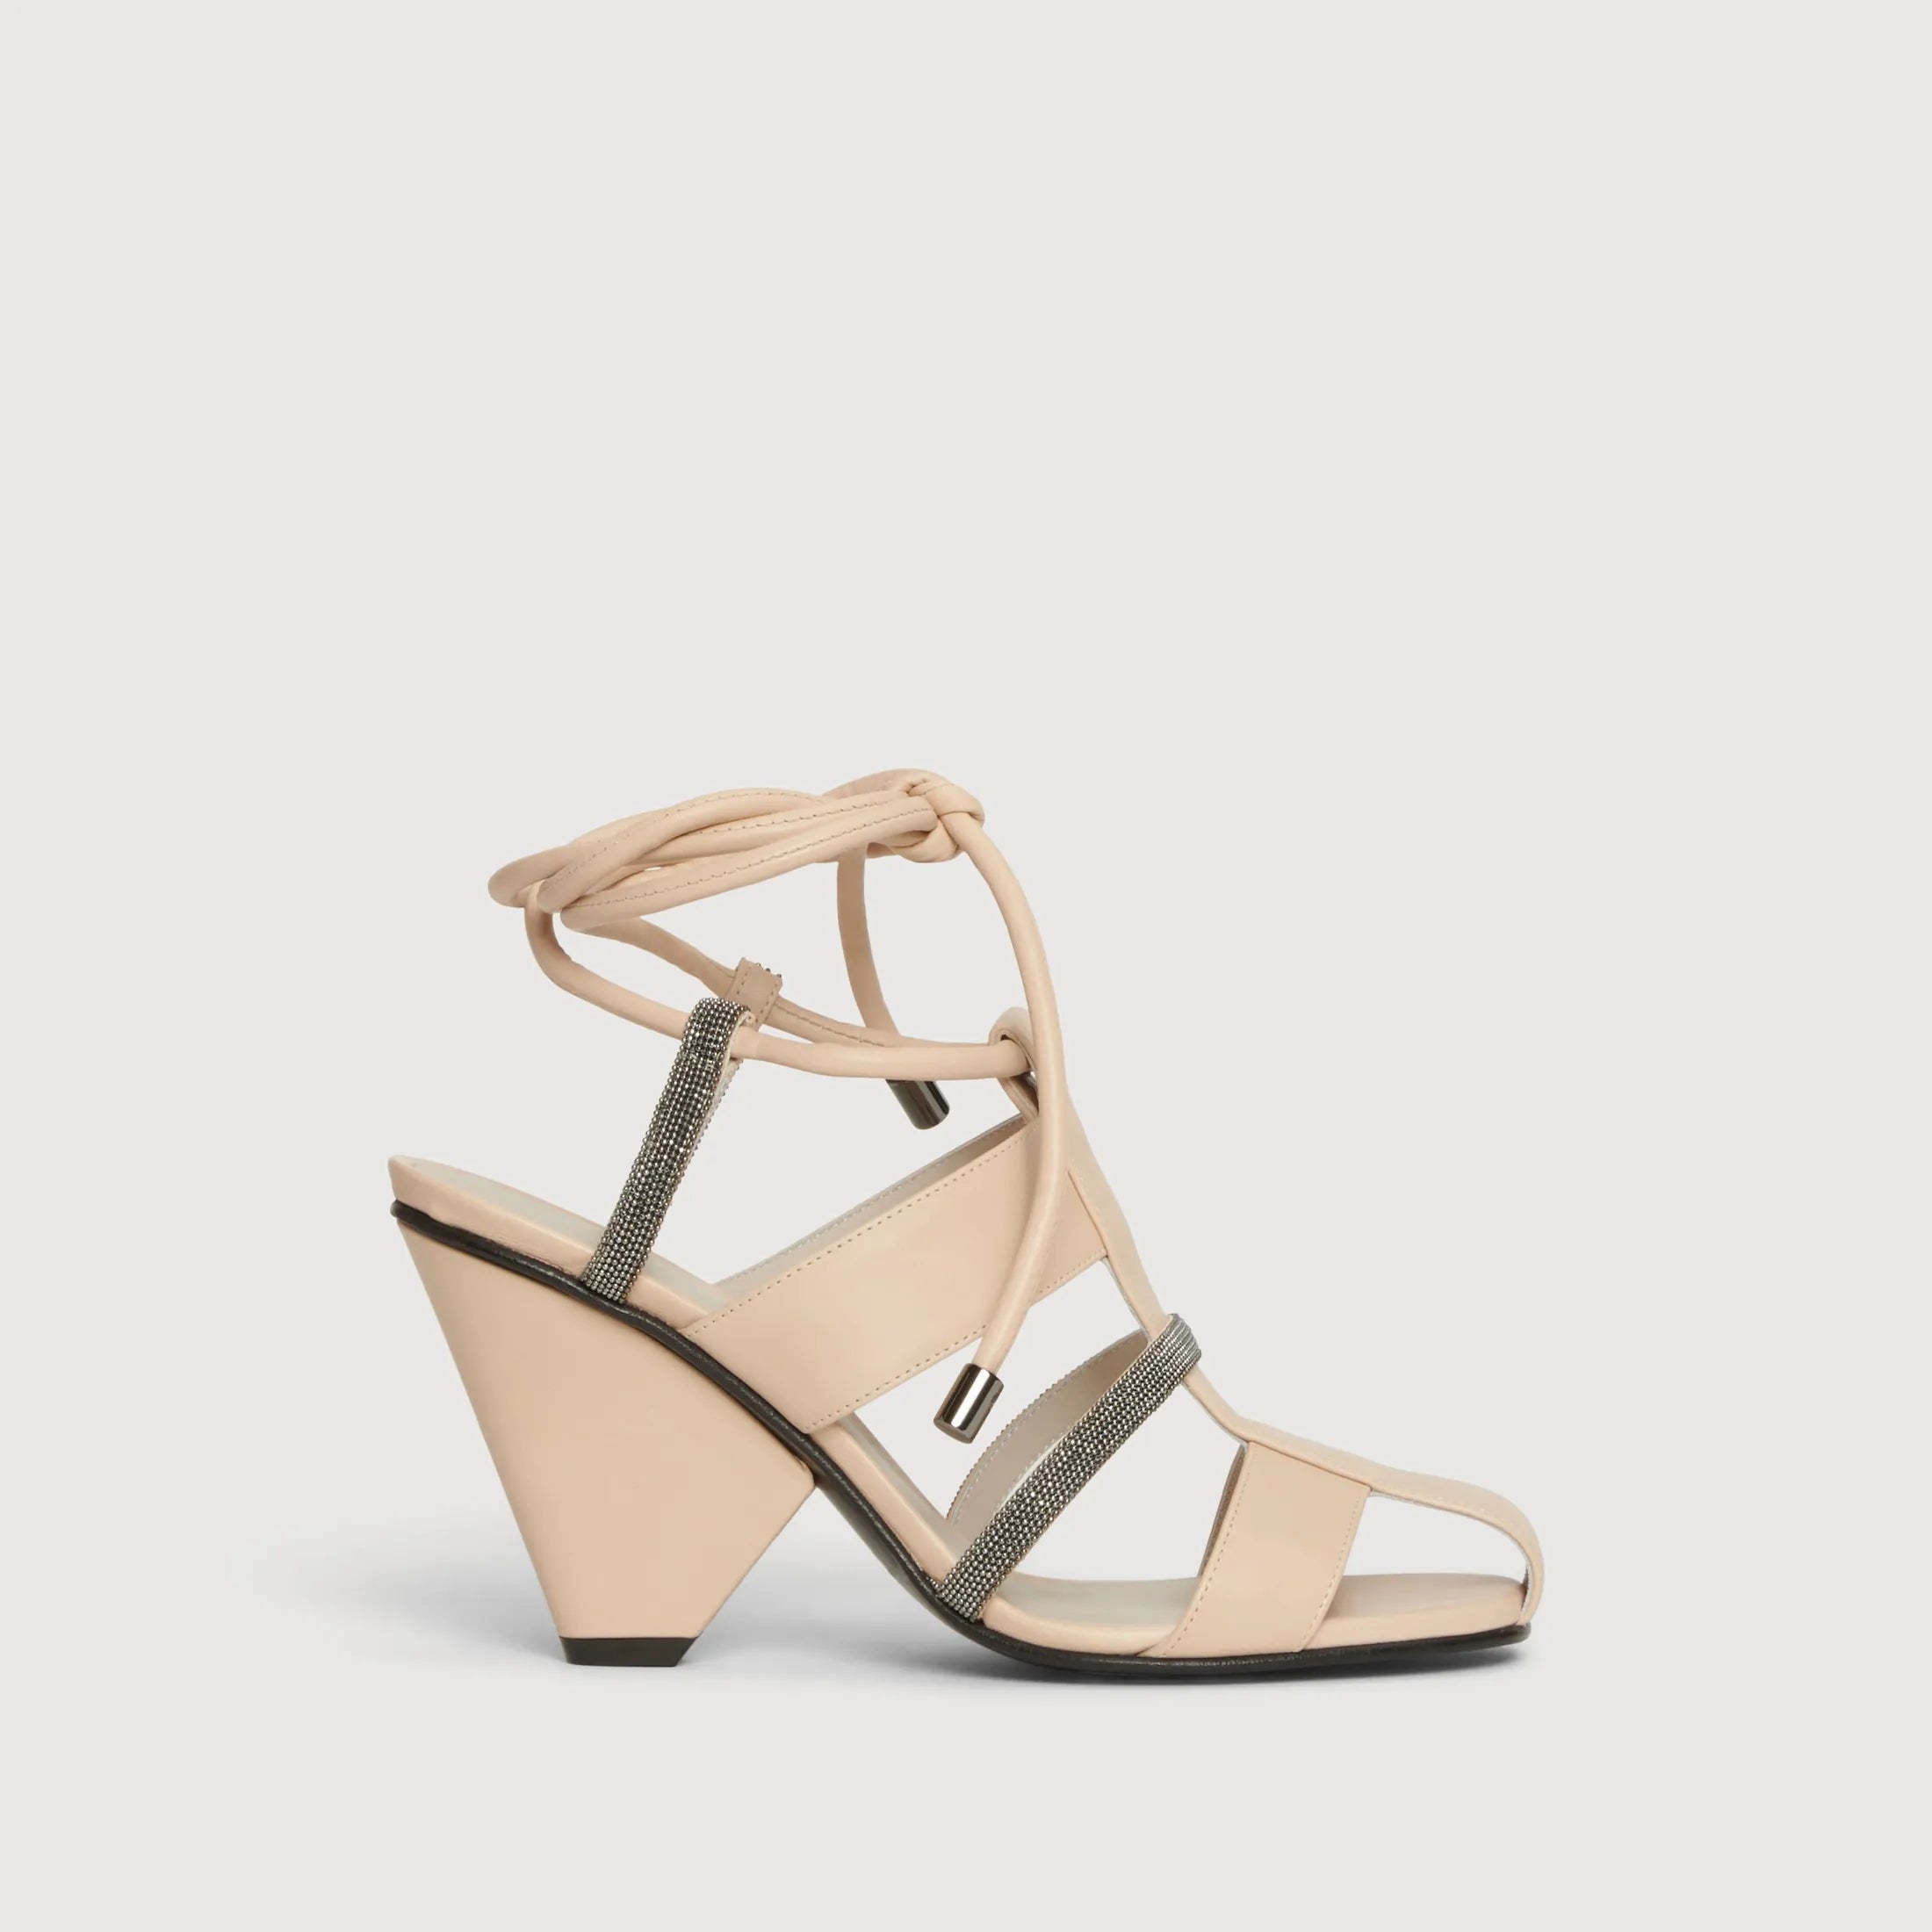 FABIANA FILIPPI - Leather Lace Up Sandals in Nude